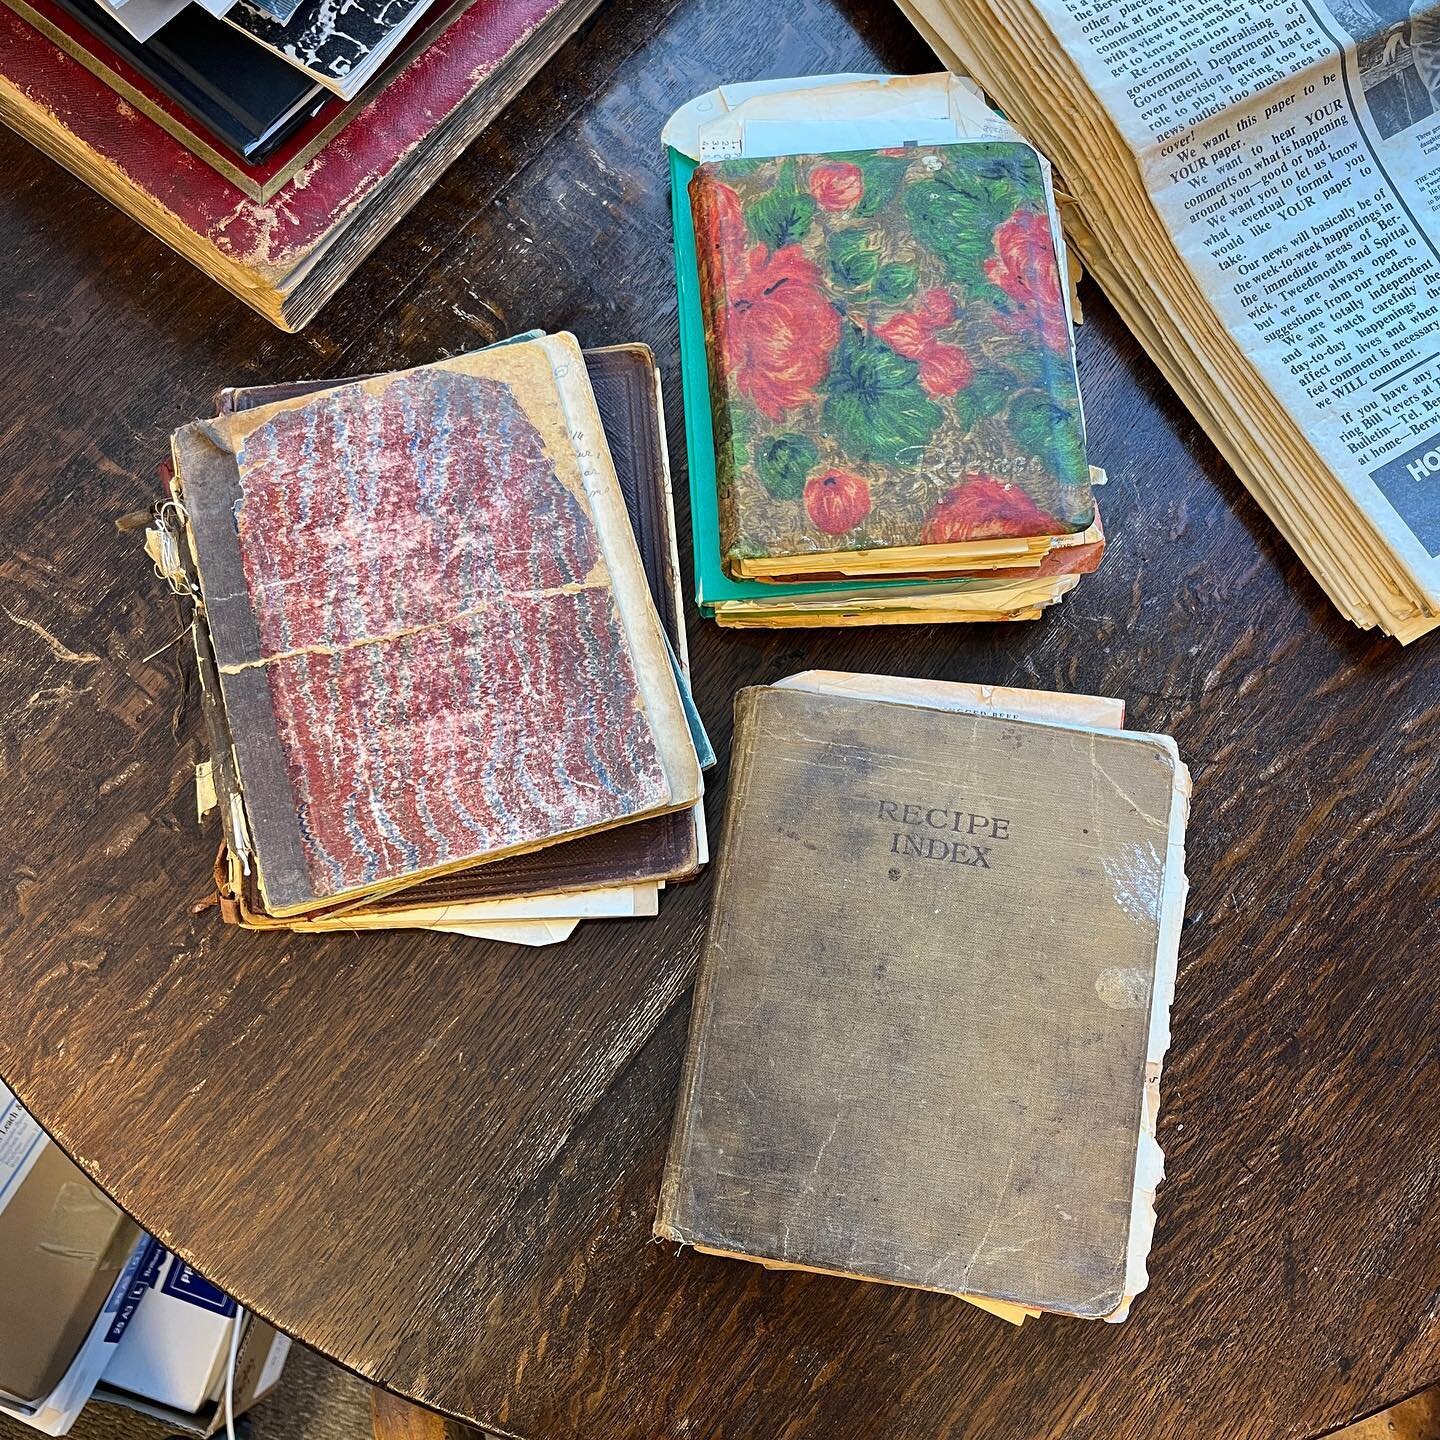 I&rsquo;ve just put one project to bed and today I started work on my next one. 

A while ago I was given a collection of family recipe books which pretty much span the whole of the 20th century. They were written by my Grandmother, Great Grandmother